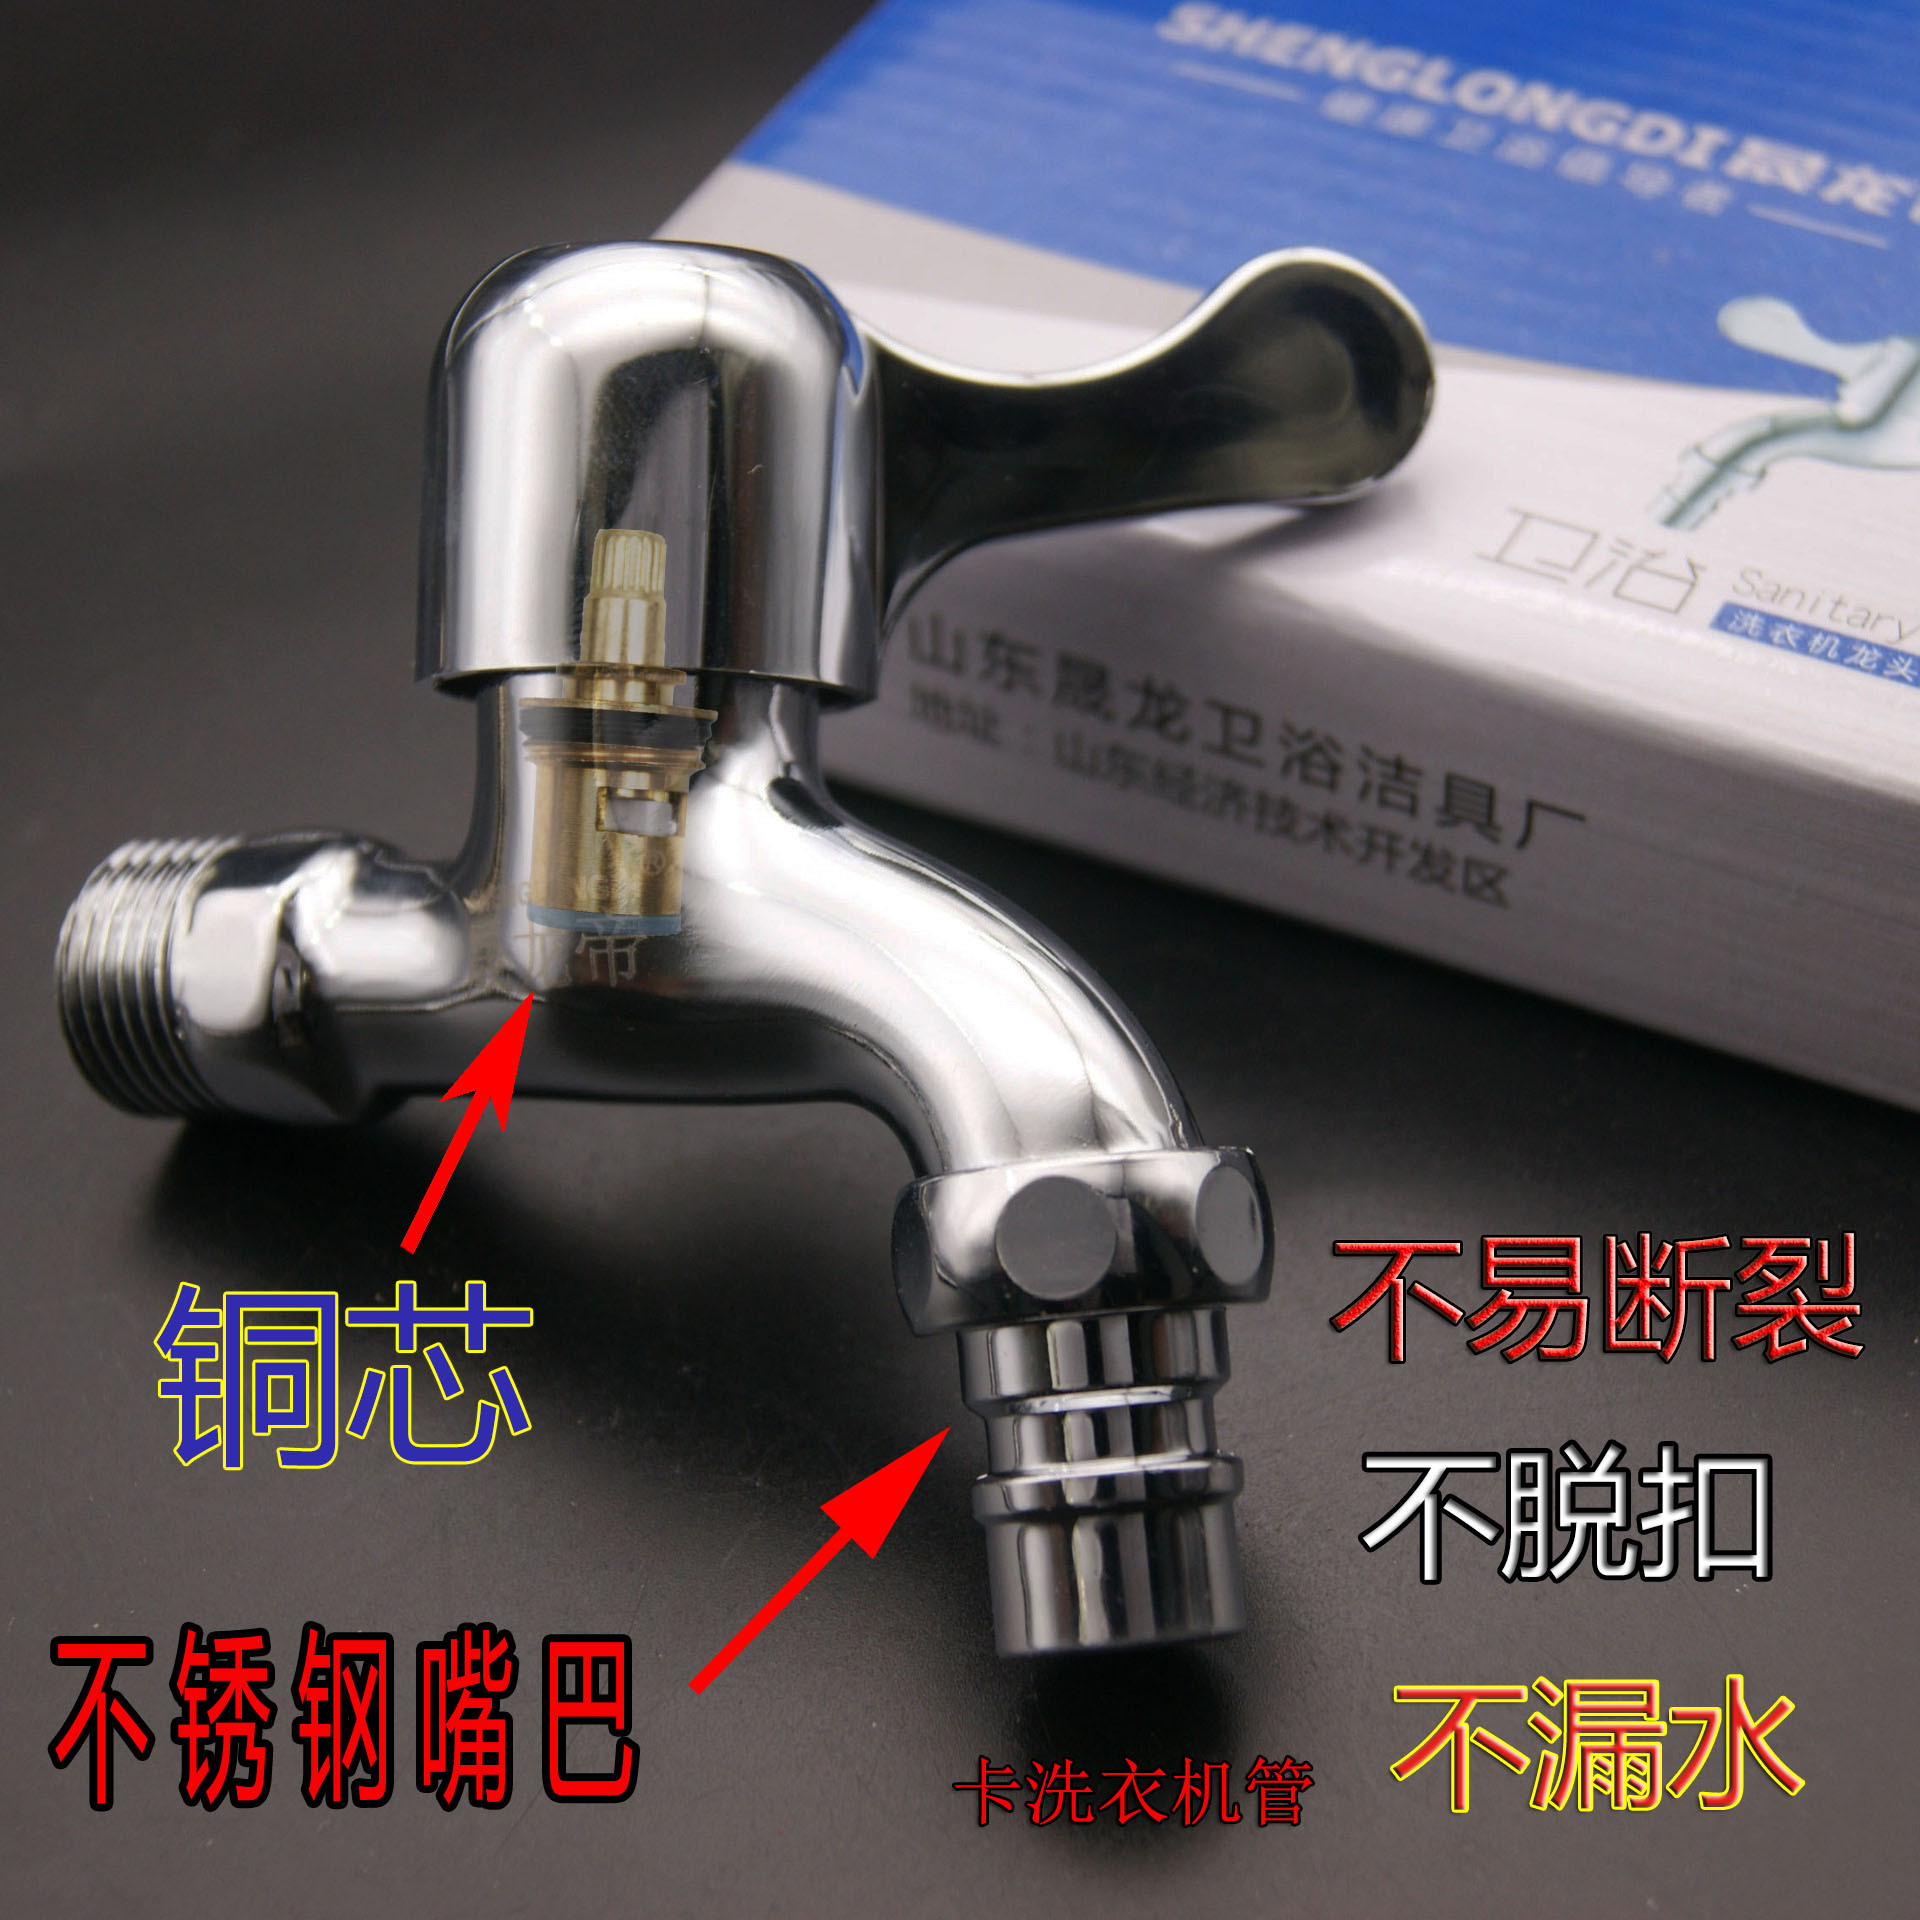 Manufacturers Supply Zinc Alloy Stainless Steel Copper Core Washing Machine Faucet Automatic Washing Machine Water Faucet Automatic Faucet